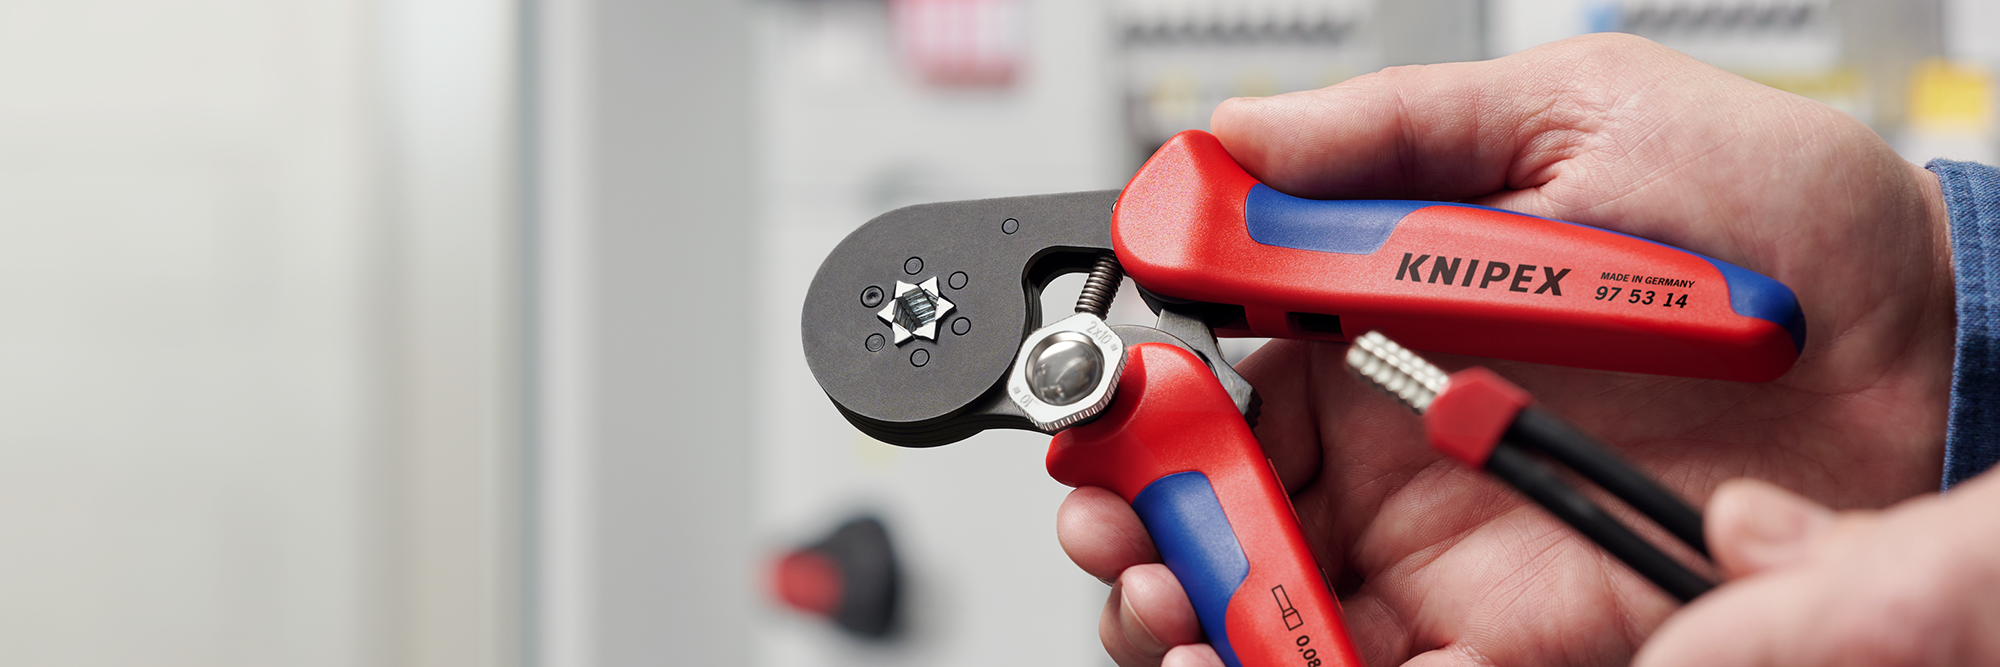 Crimping for Connecting Wires - Knipex - KnowHow